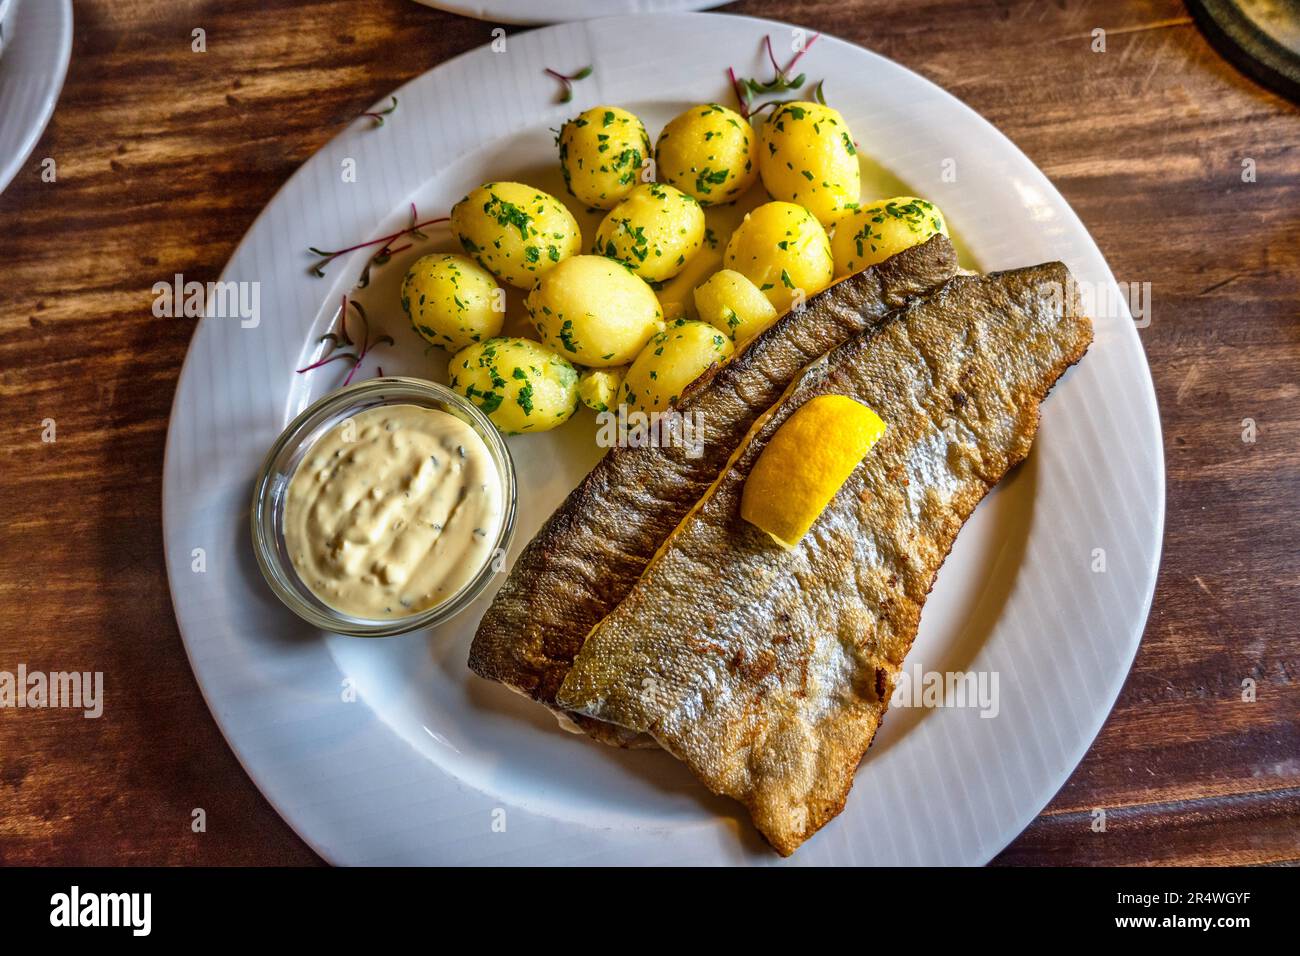 Golden fried zander fish with potato and tartar sauce on wooden table, closeup. Stock Photo